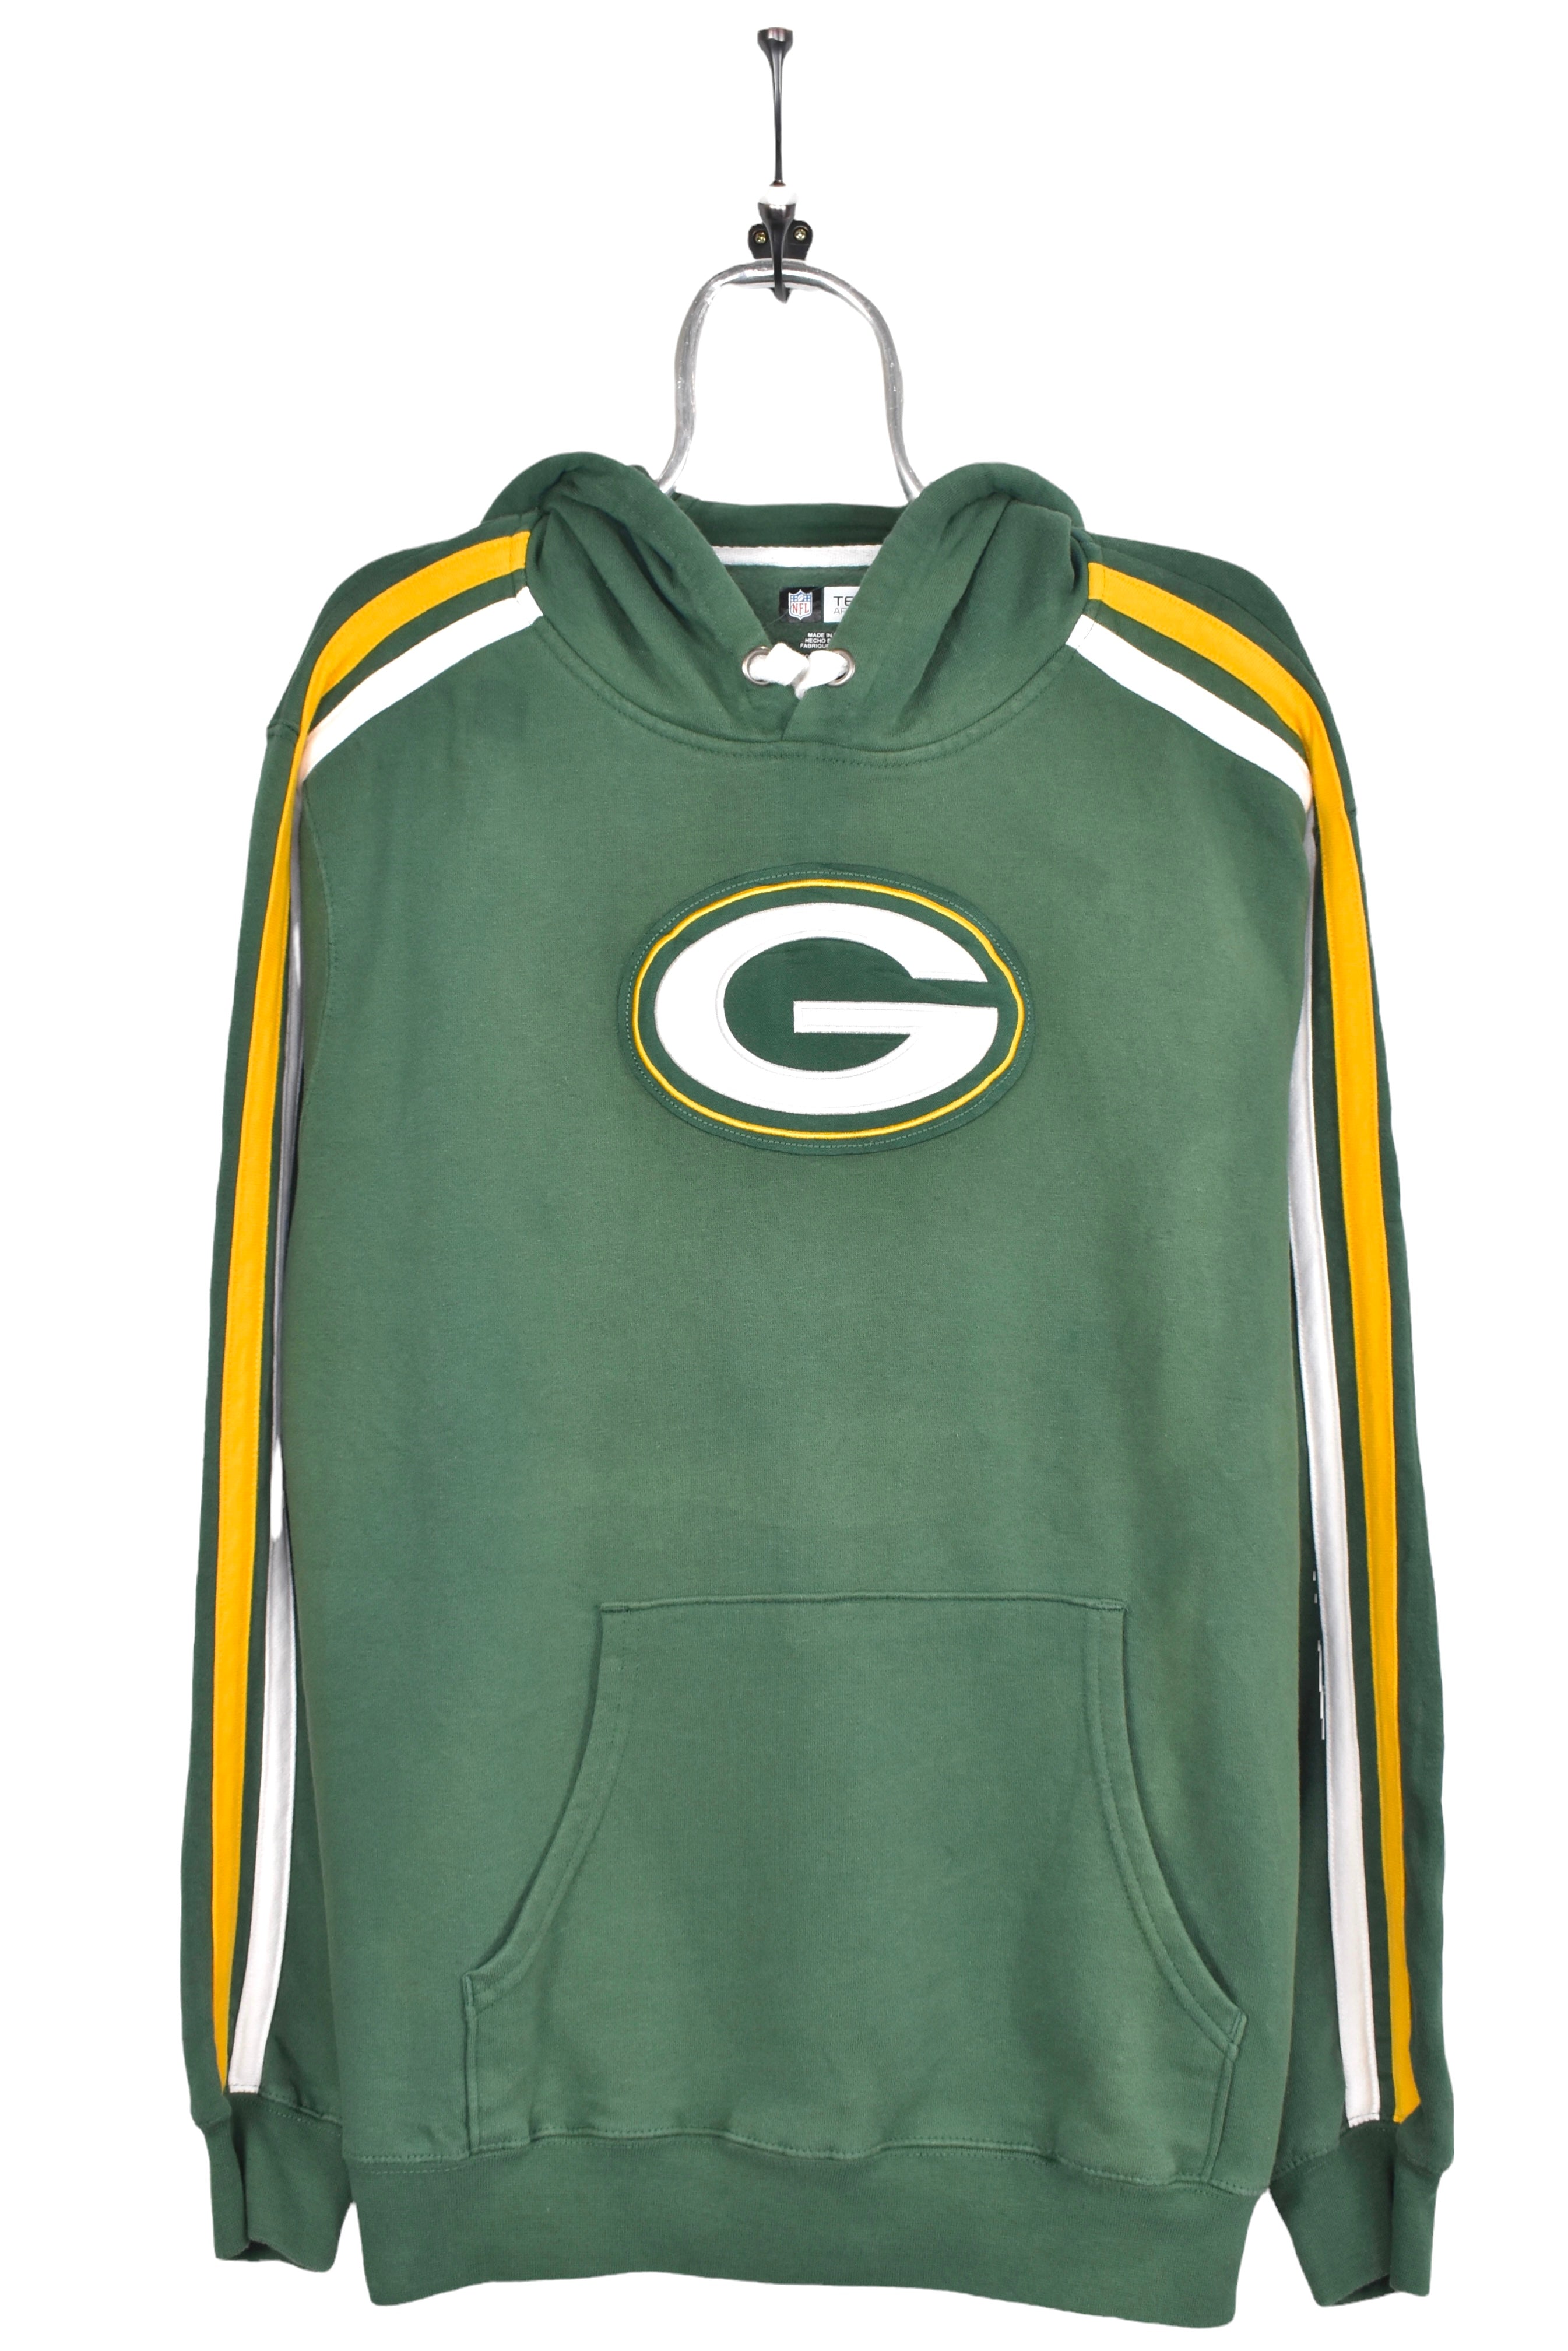 Green Bay Packers Women's Bottoms at the Packers Pro Shop